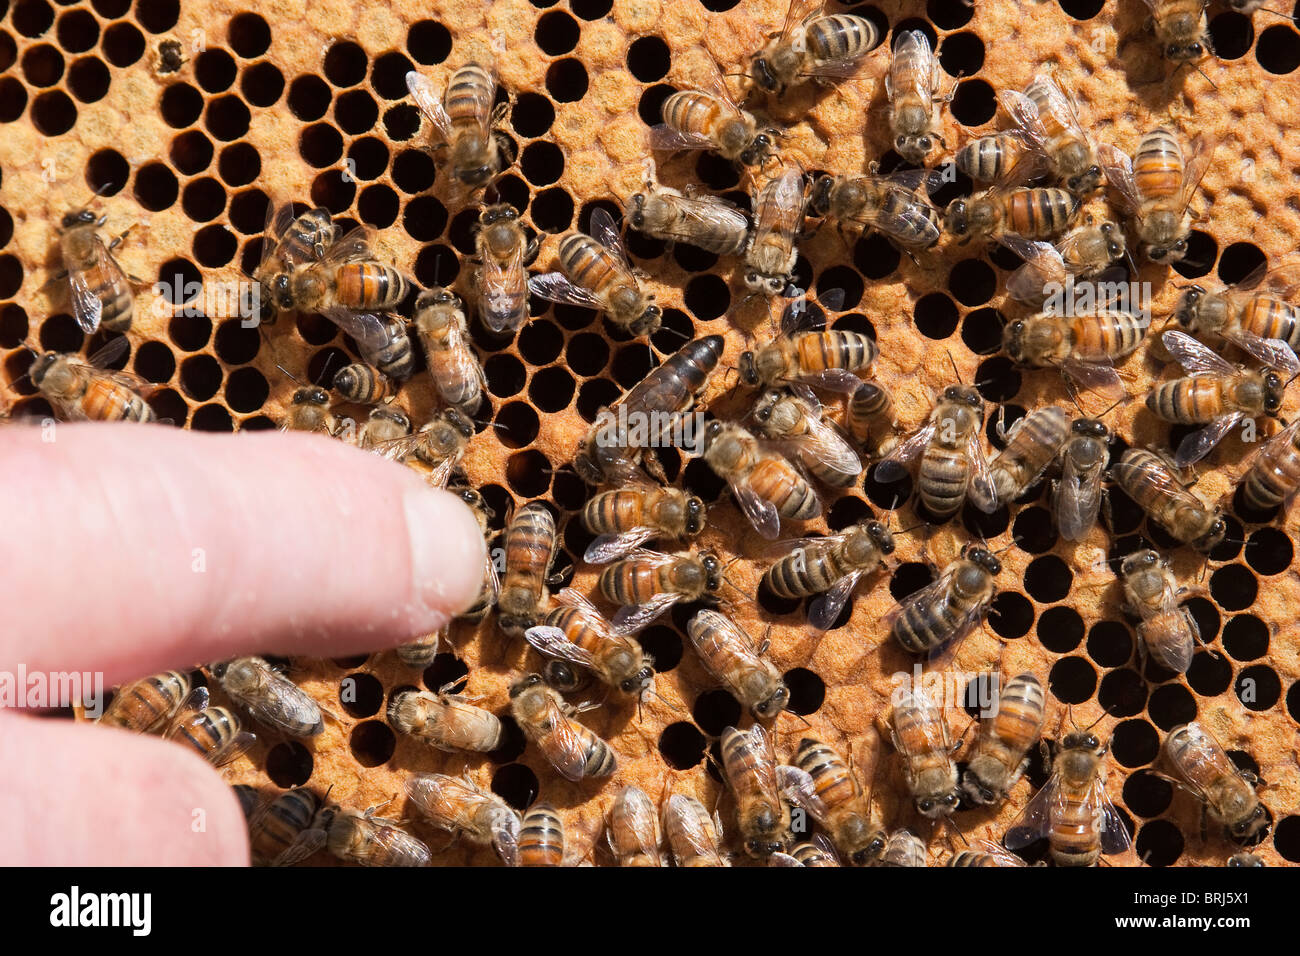 Honey bees in hive with beekeeper pointing to the queen bee Stock Photo